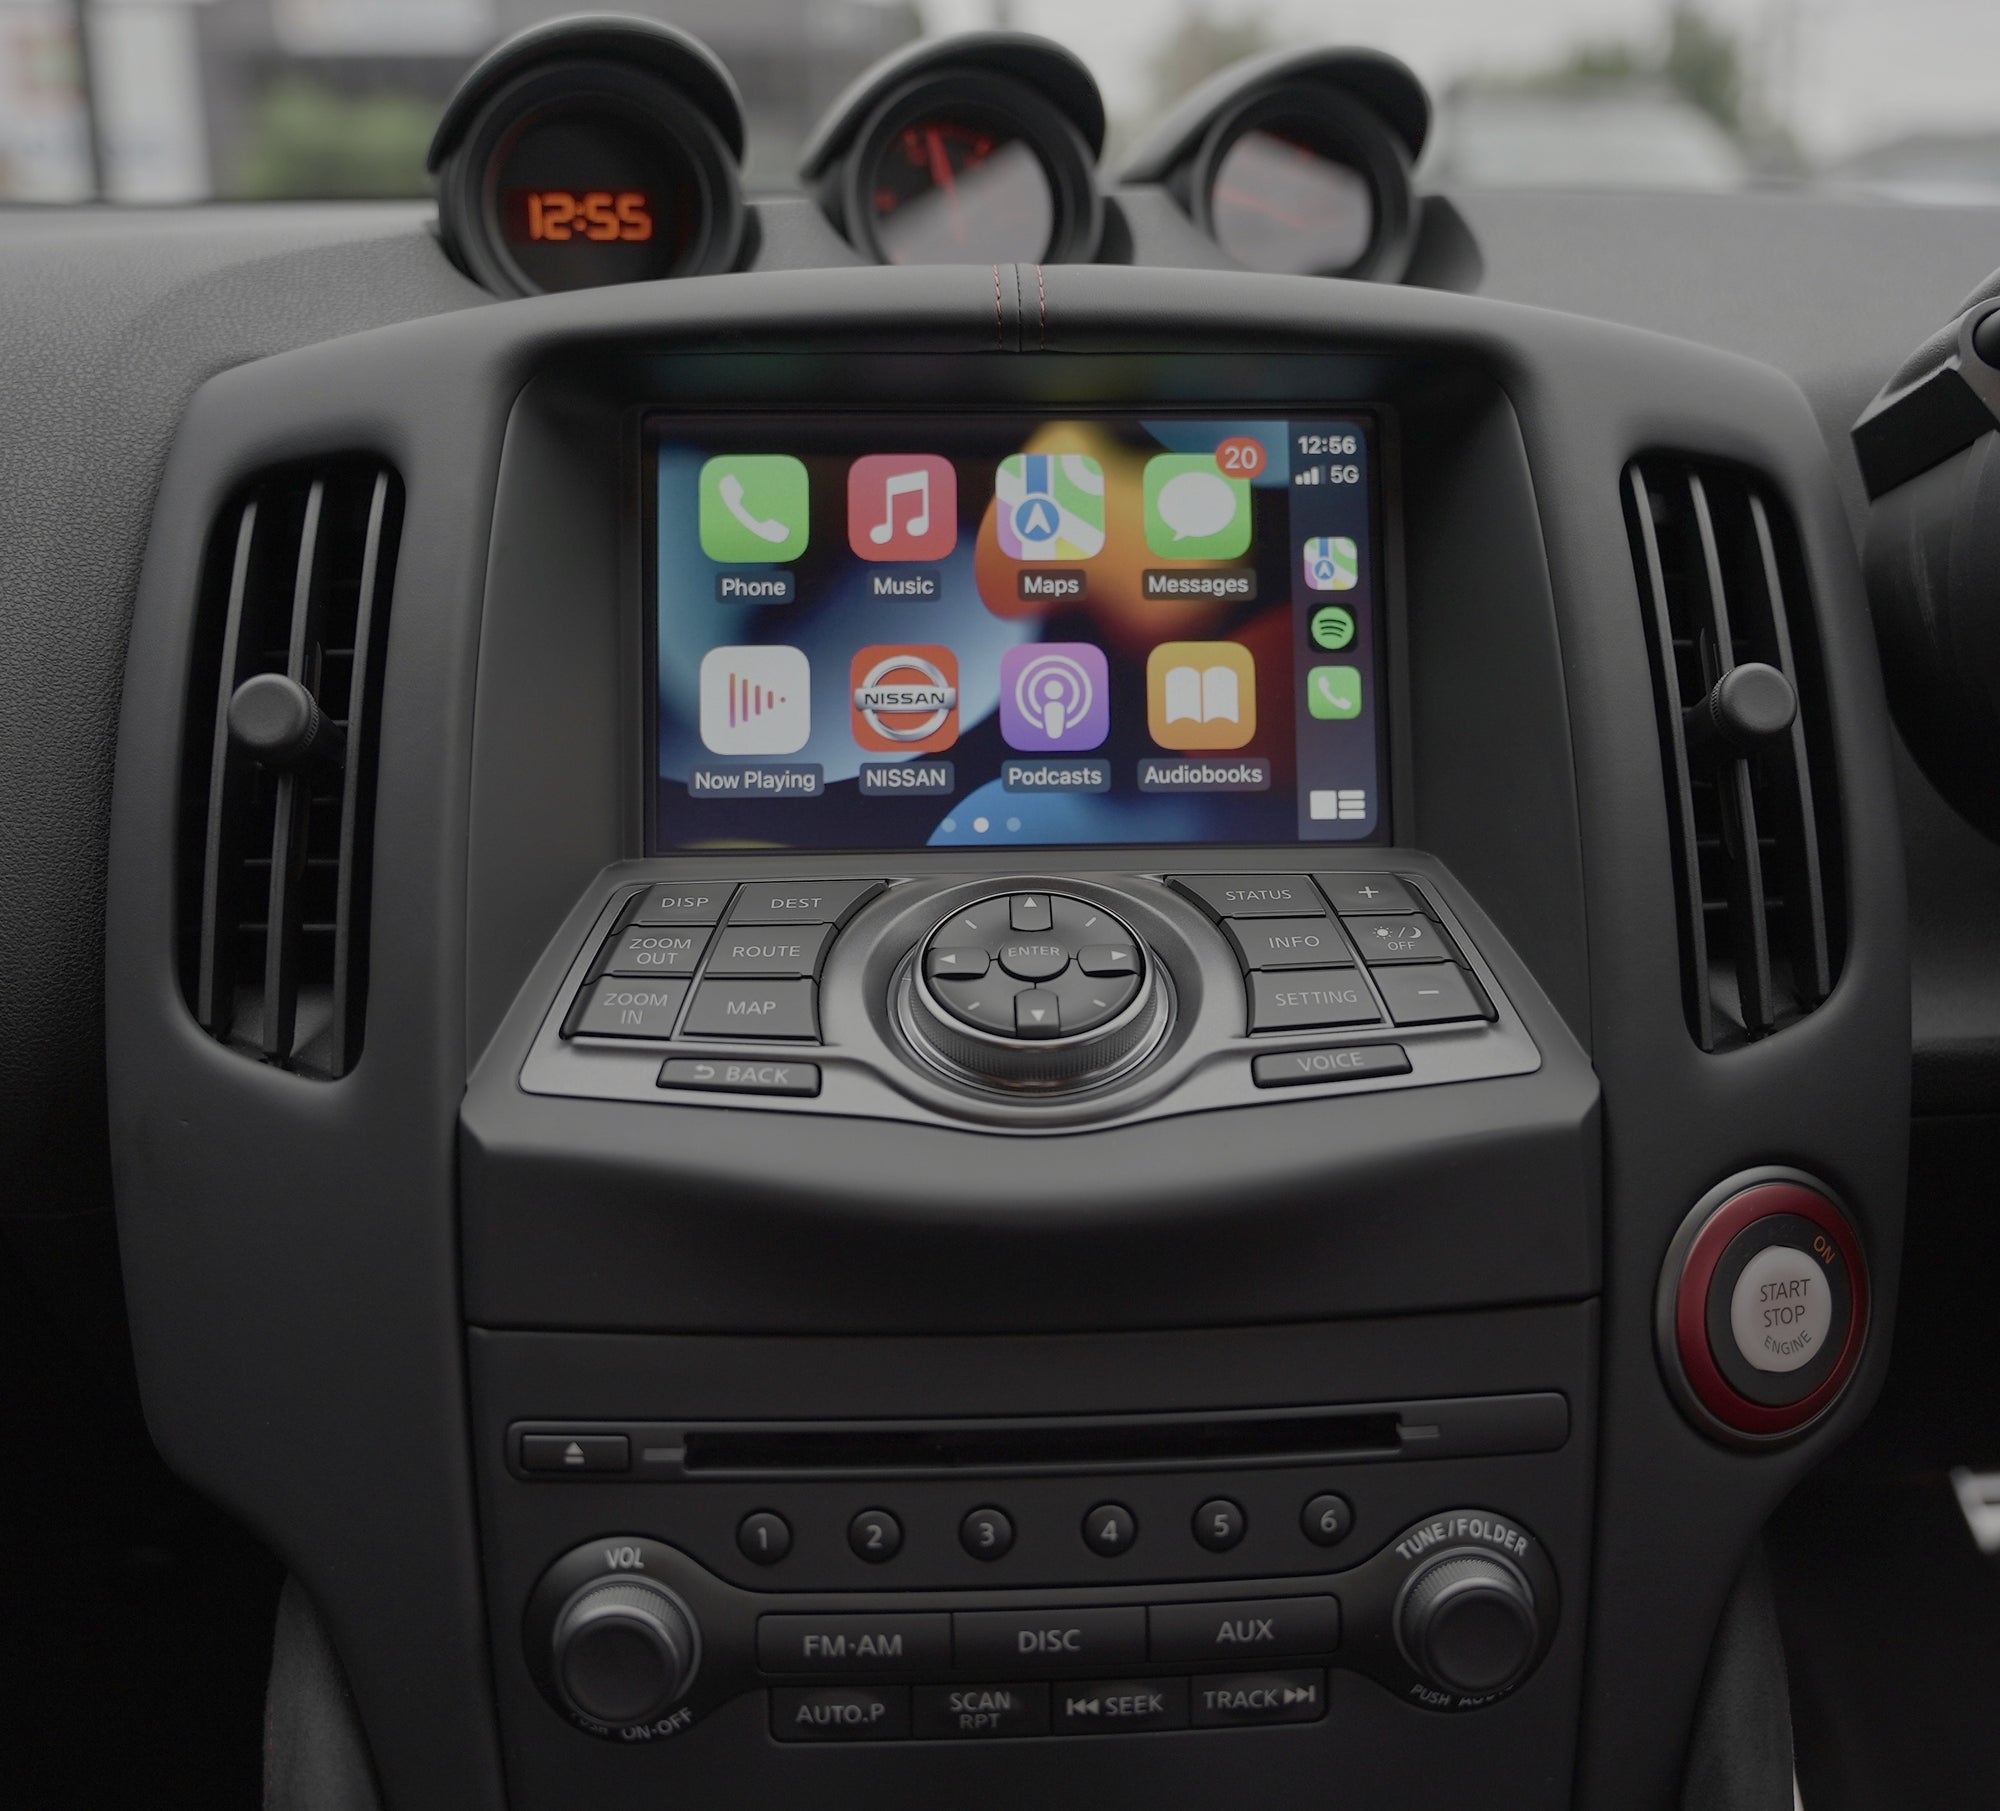 How To Set Up Apple CarPlay & Android Auto on Nissans